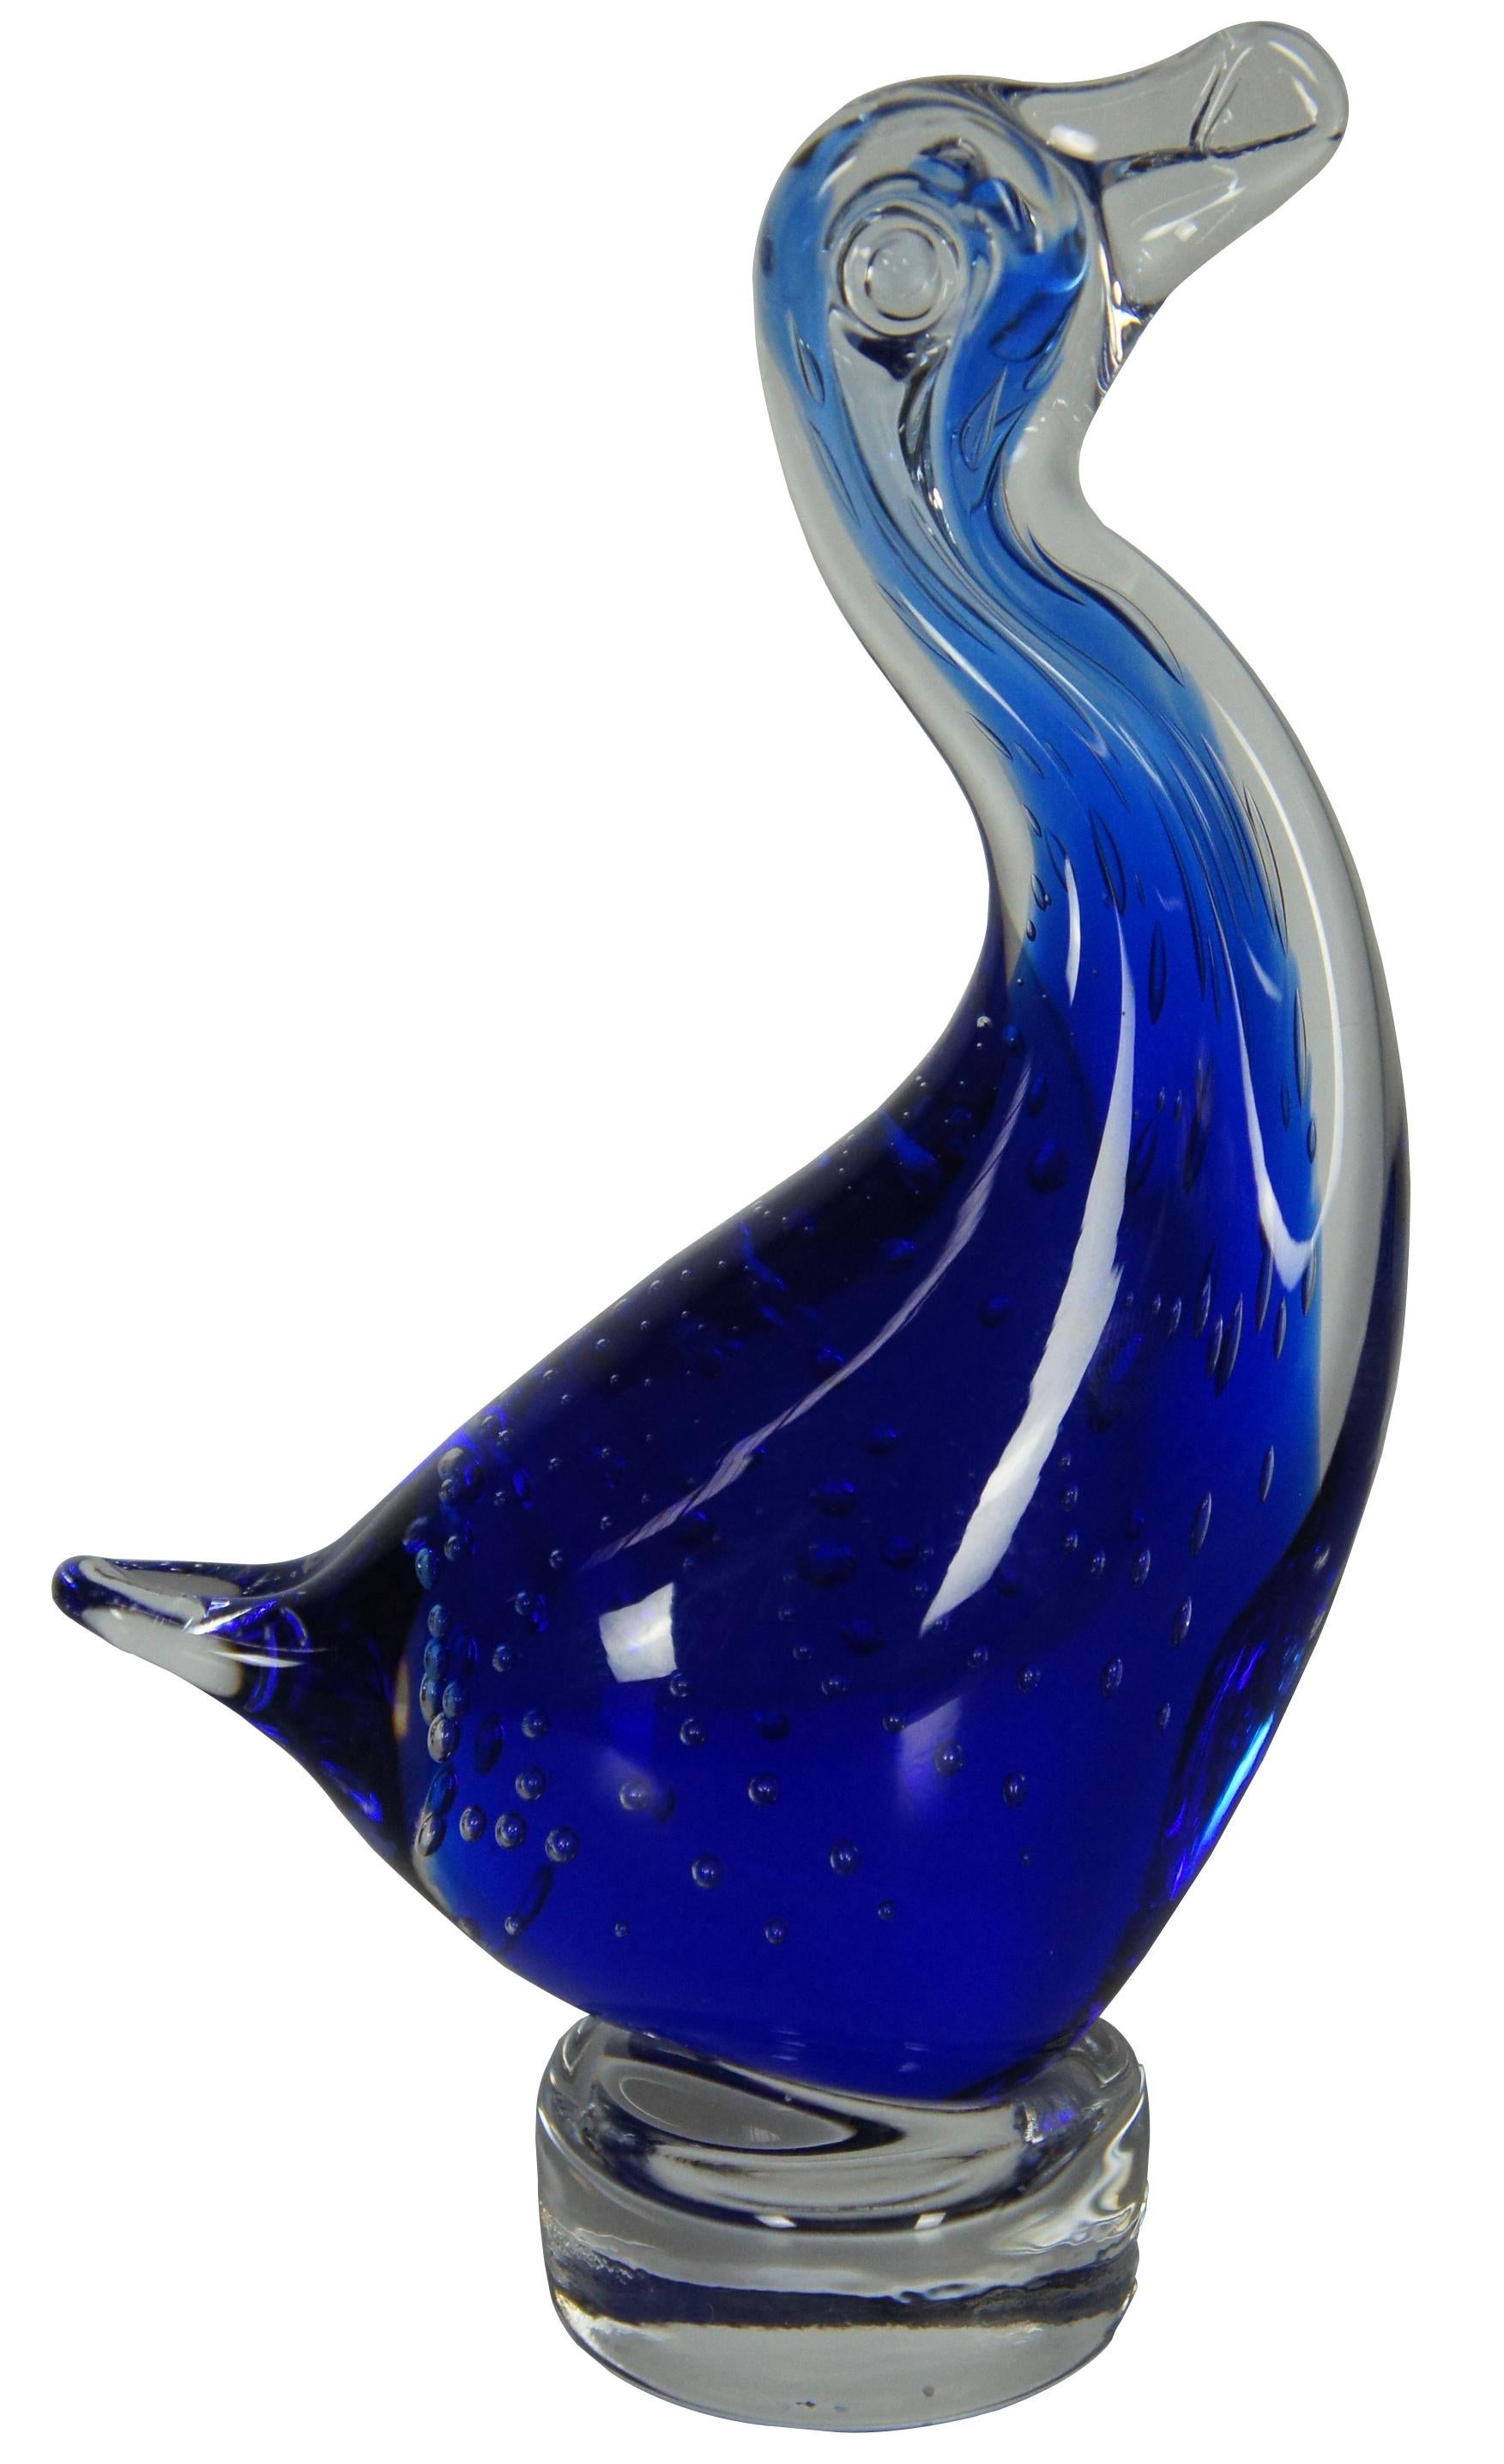 Murano studio art glass figurine in the shape of a blue duck on a transparent base with controlled bubble design, by Lavorazione Arte, Italy. Measure: 8